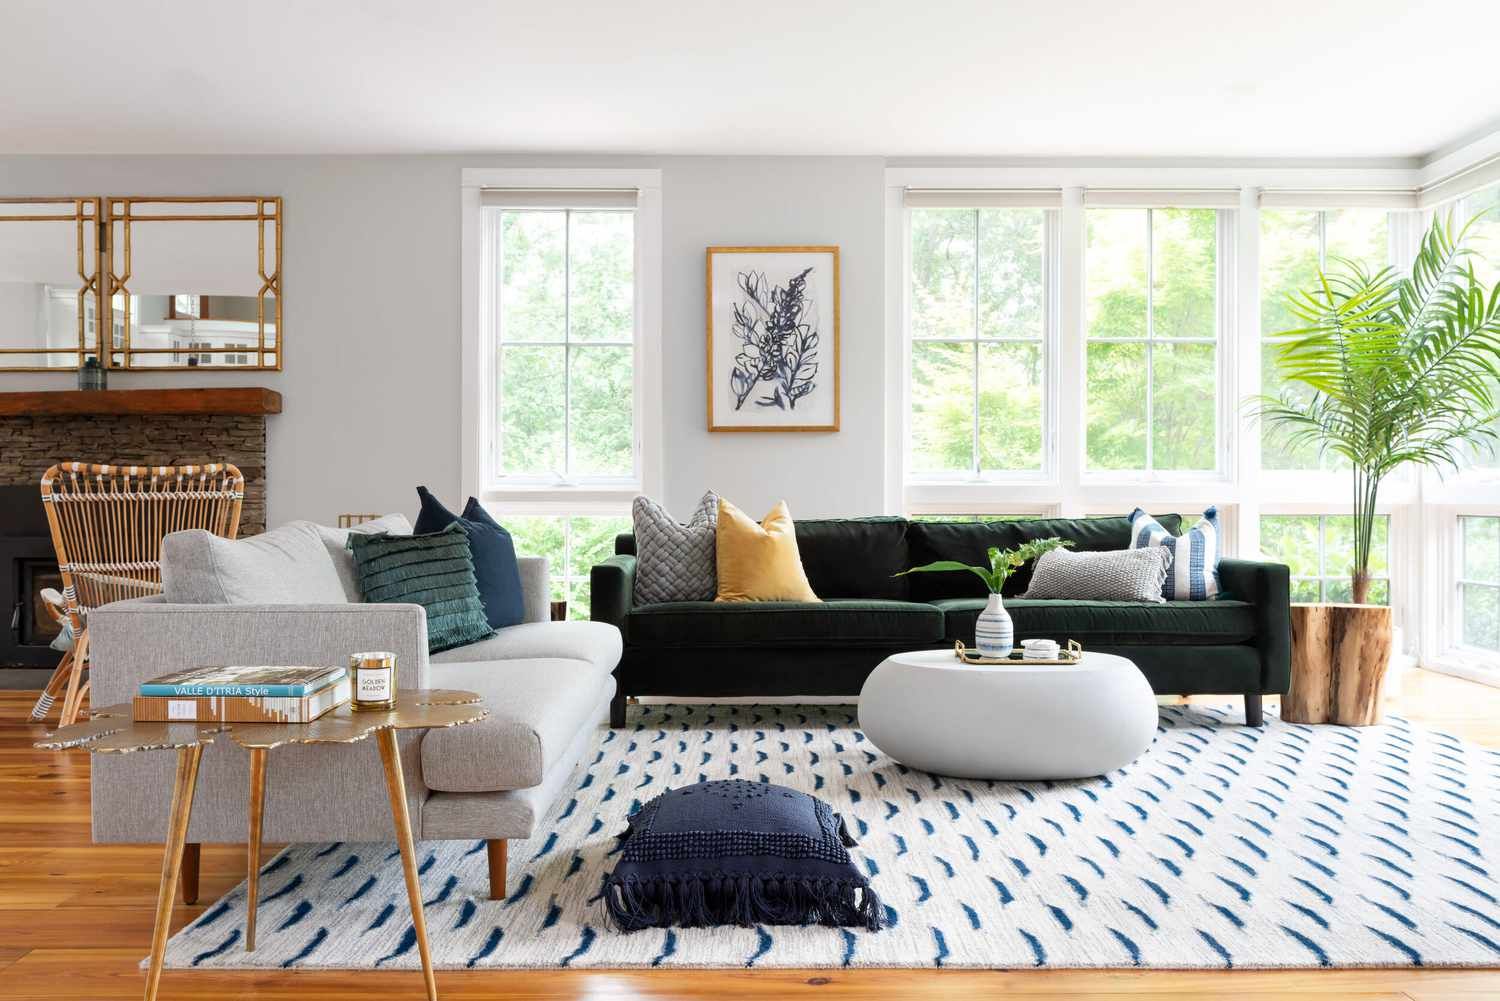 How To Arrange Two Sofas In A Living Room With Sofas In Multiple Colors (View 3 of 15)